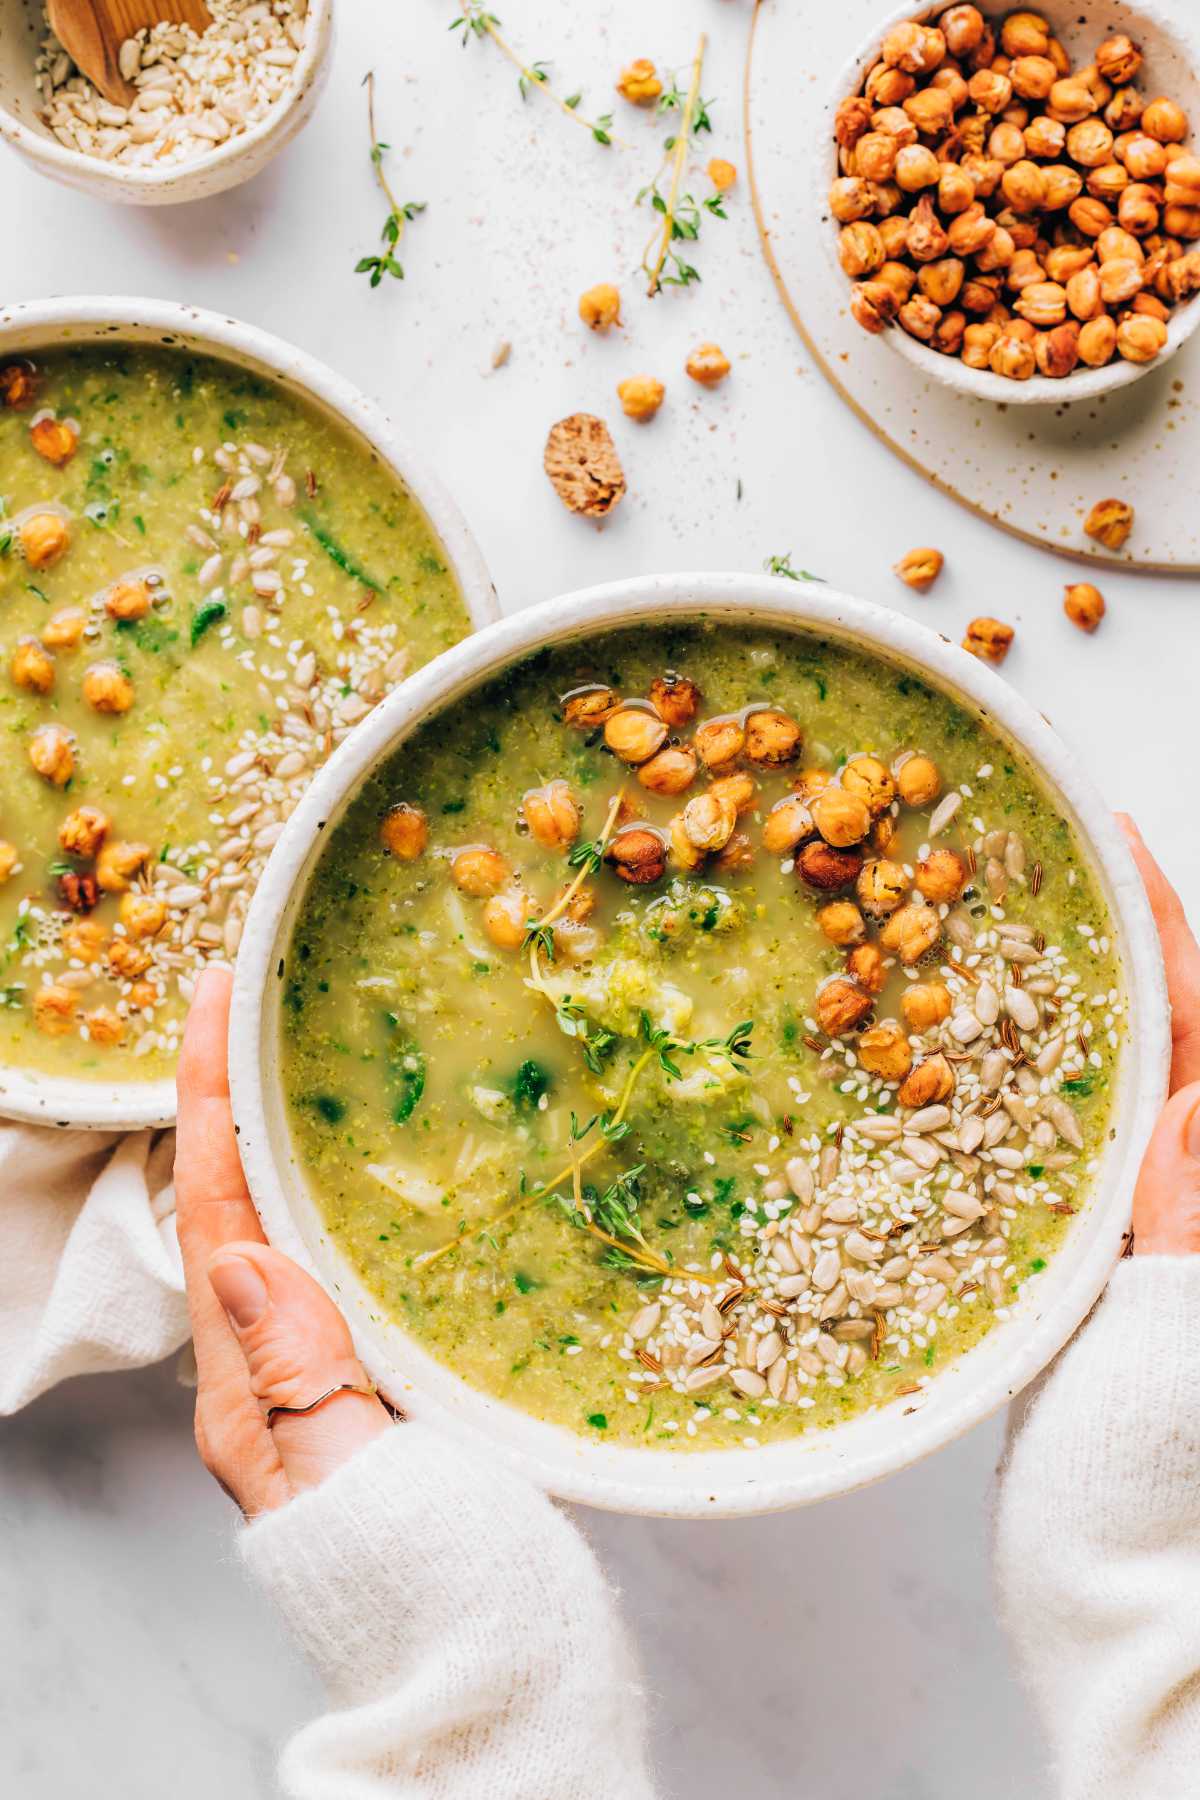 two hands holding a bowl of vegan broccoli soup with chickpeas